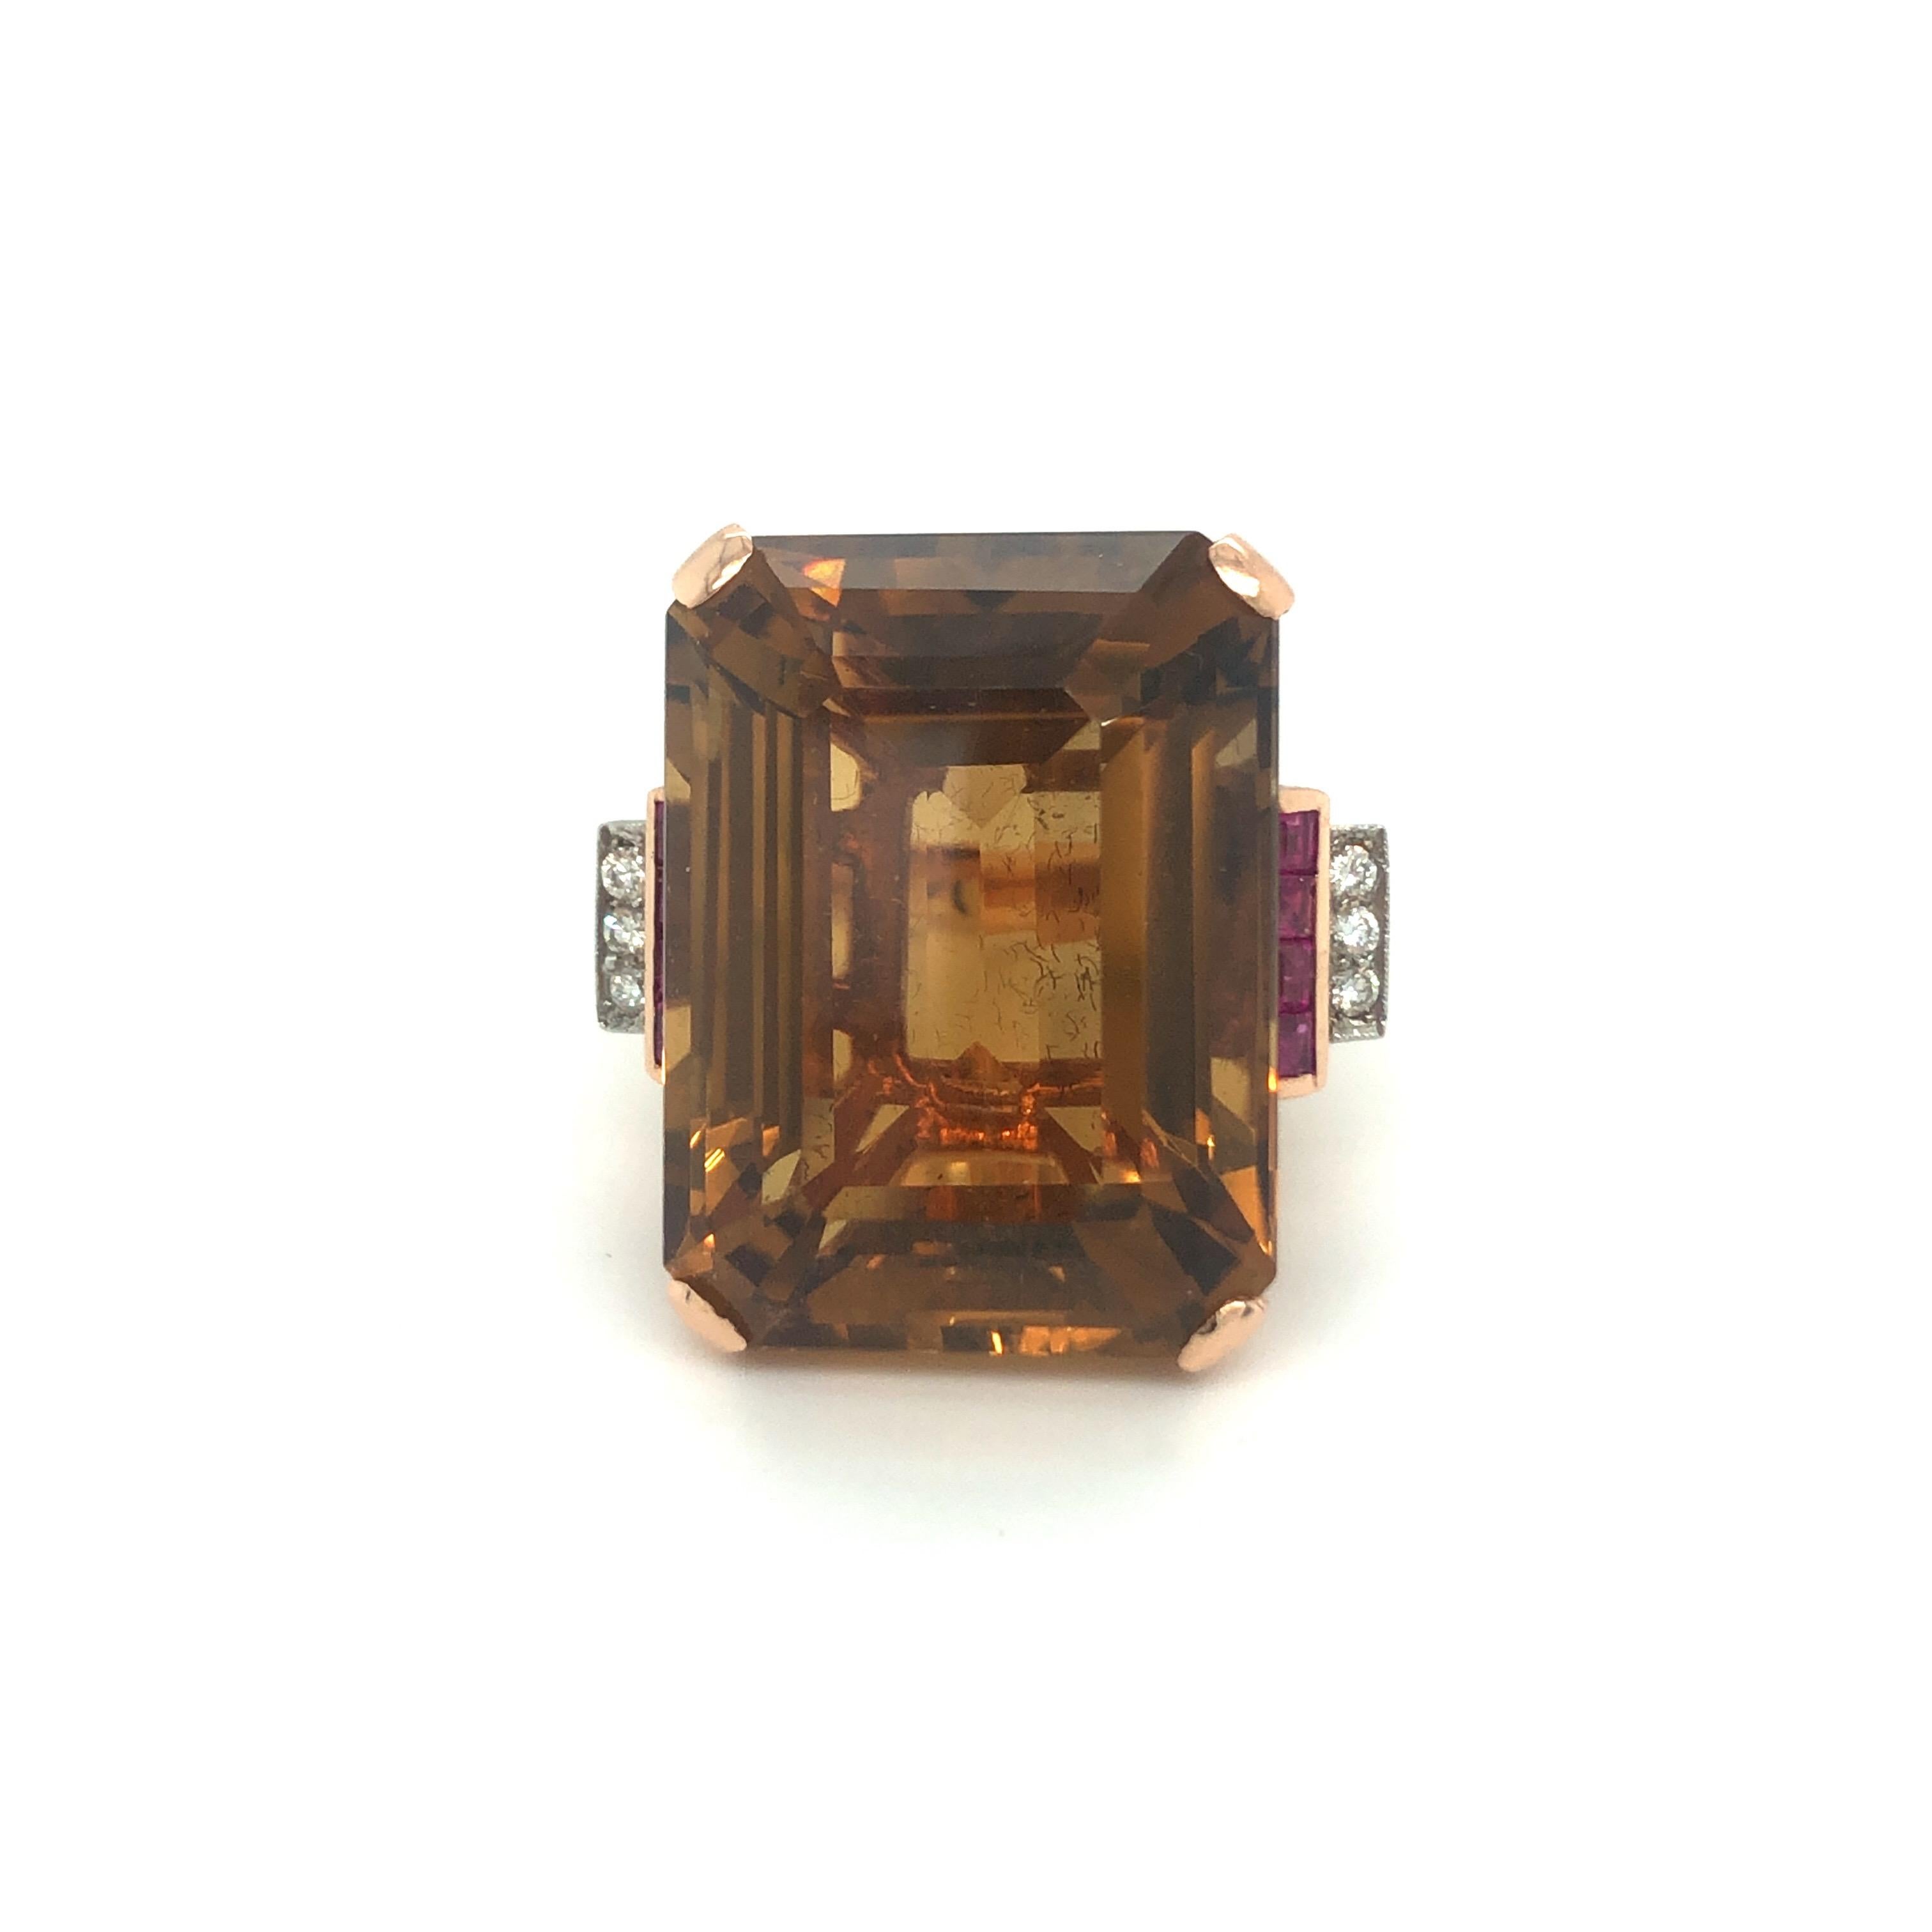 Eye-catching citrine, ruby and diamond 14 karat rose gold cocktail ring, circa 1945.
Crafted in 14 karat rose gold and claw-set with an impressive honey-coloured citrine between tapering shoulders of square-cut rubies and brilliant-cut diamonds.